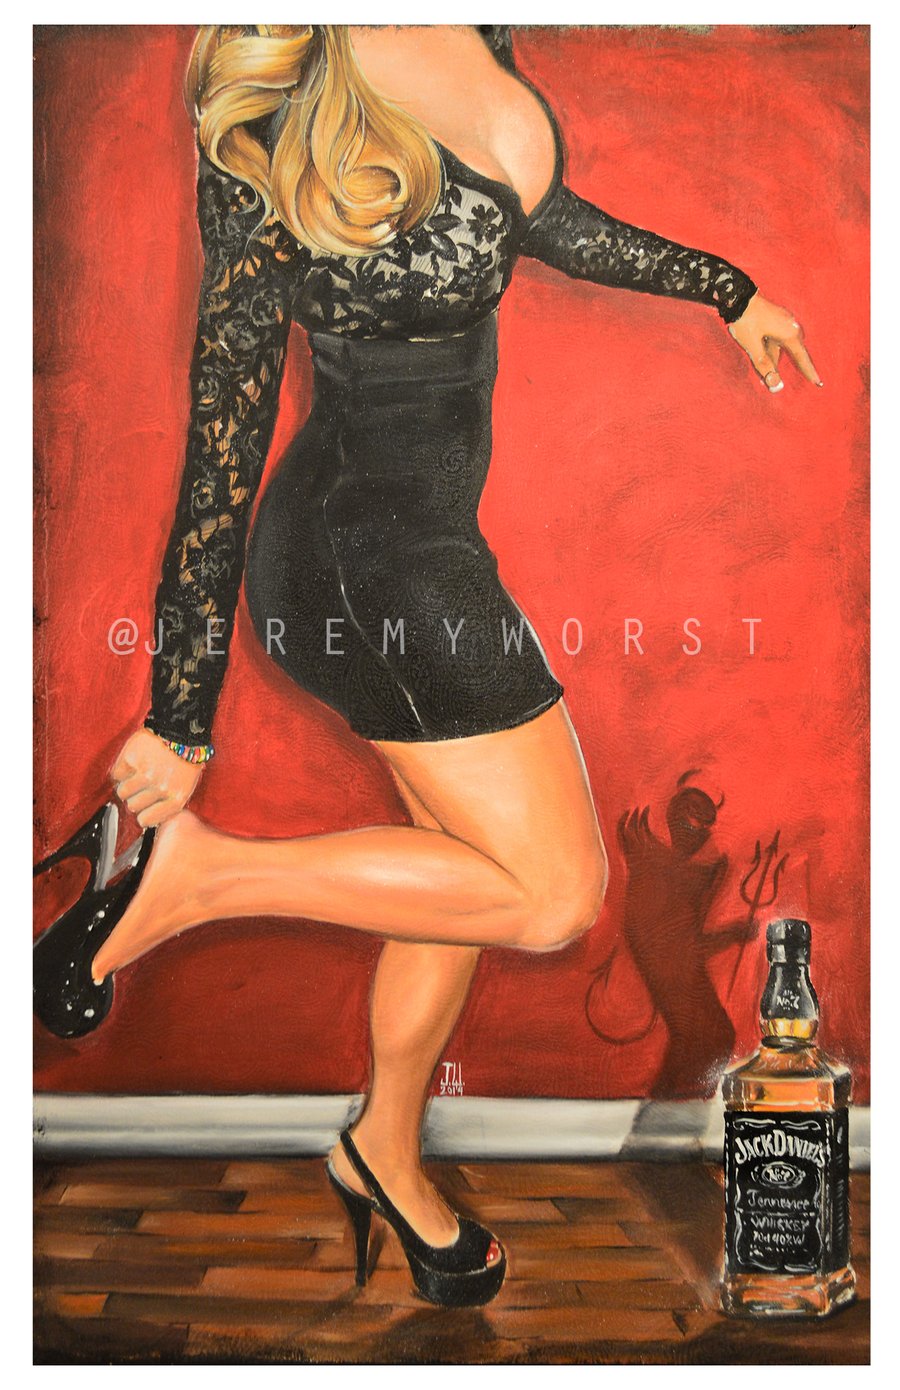 Image of JEREMY WORST Dancing with the Devil Again Artwork Signed Poster Print poster size jack daniels